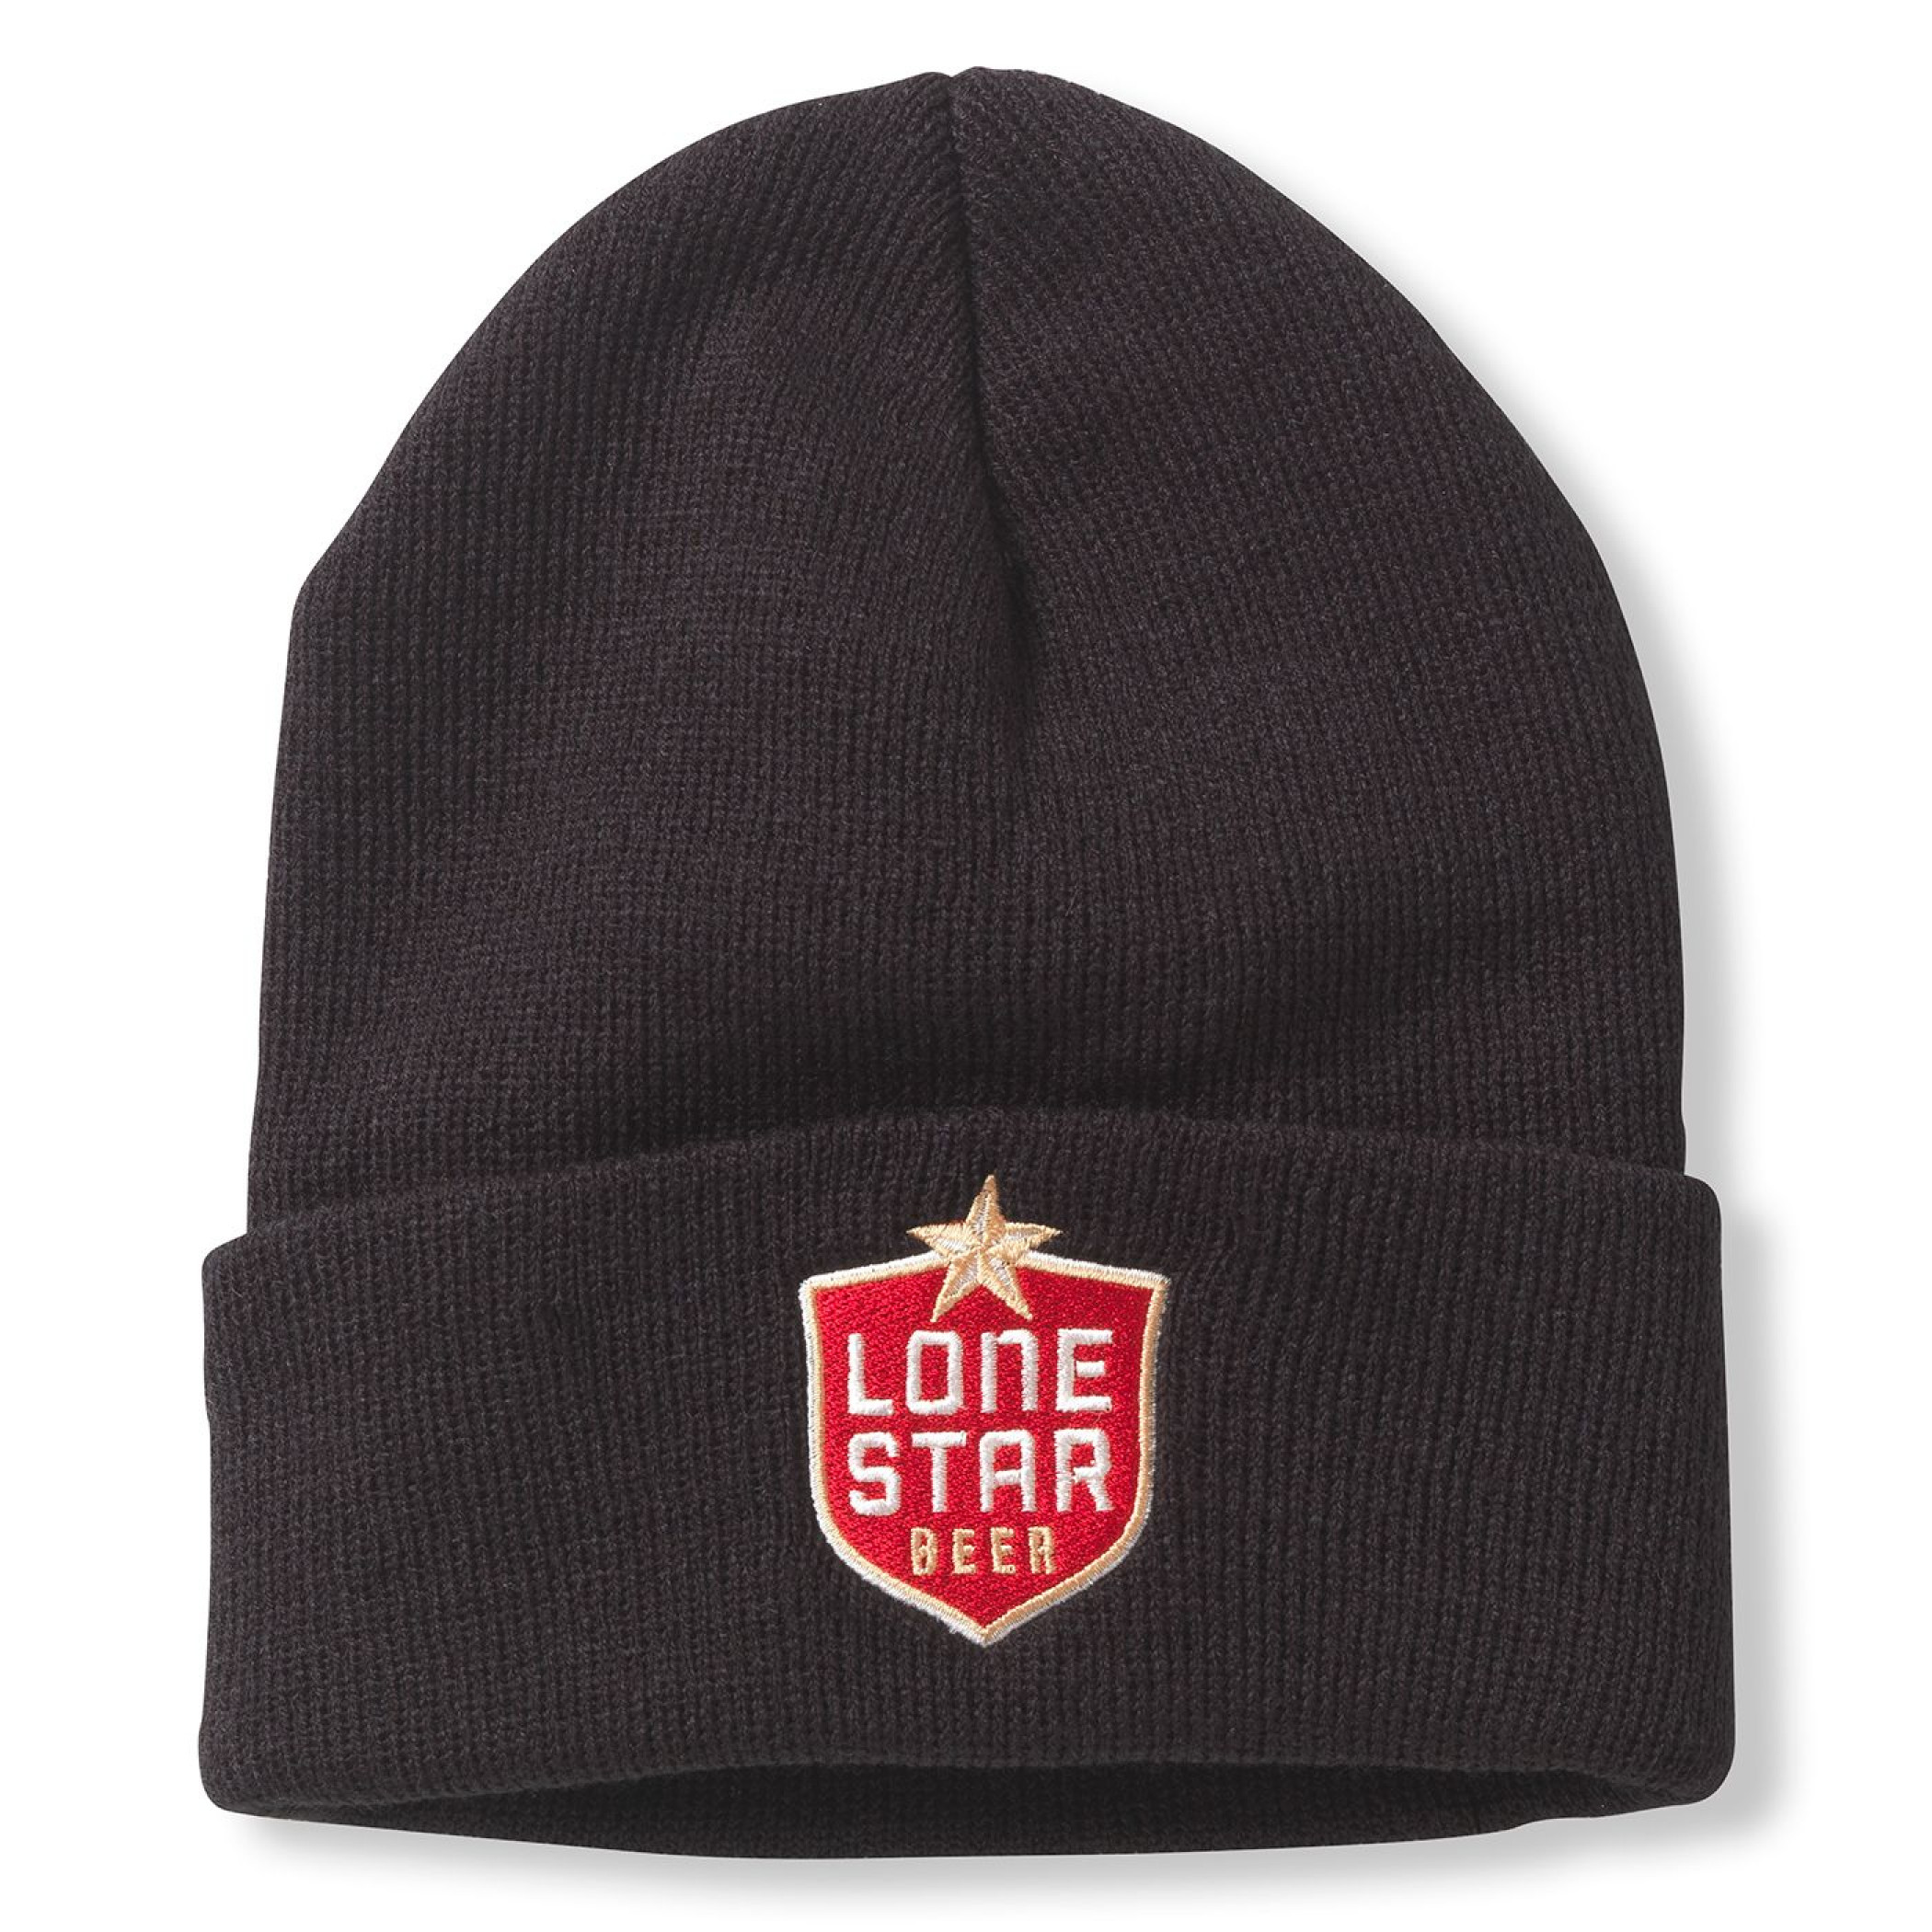 Lone Star Beer Embroidered Logo Cuffed Knit Beanie